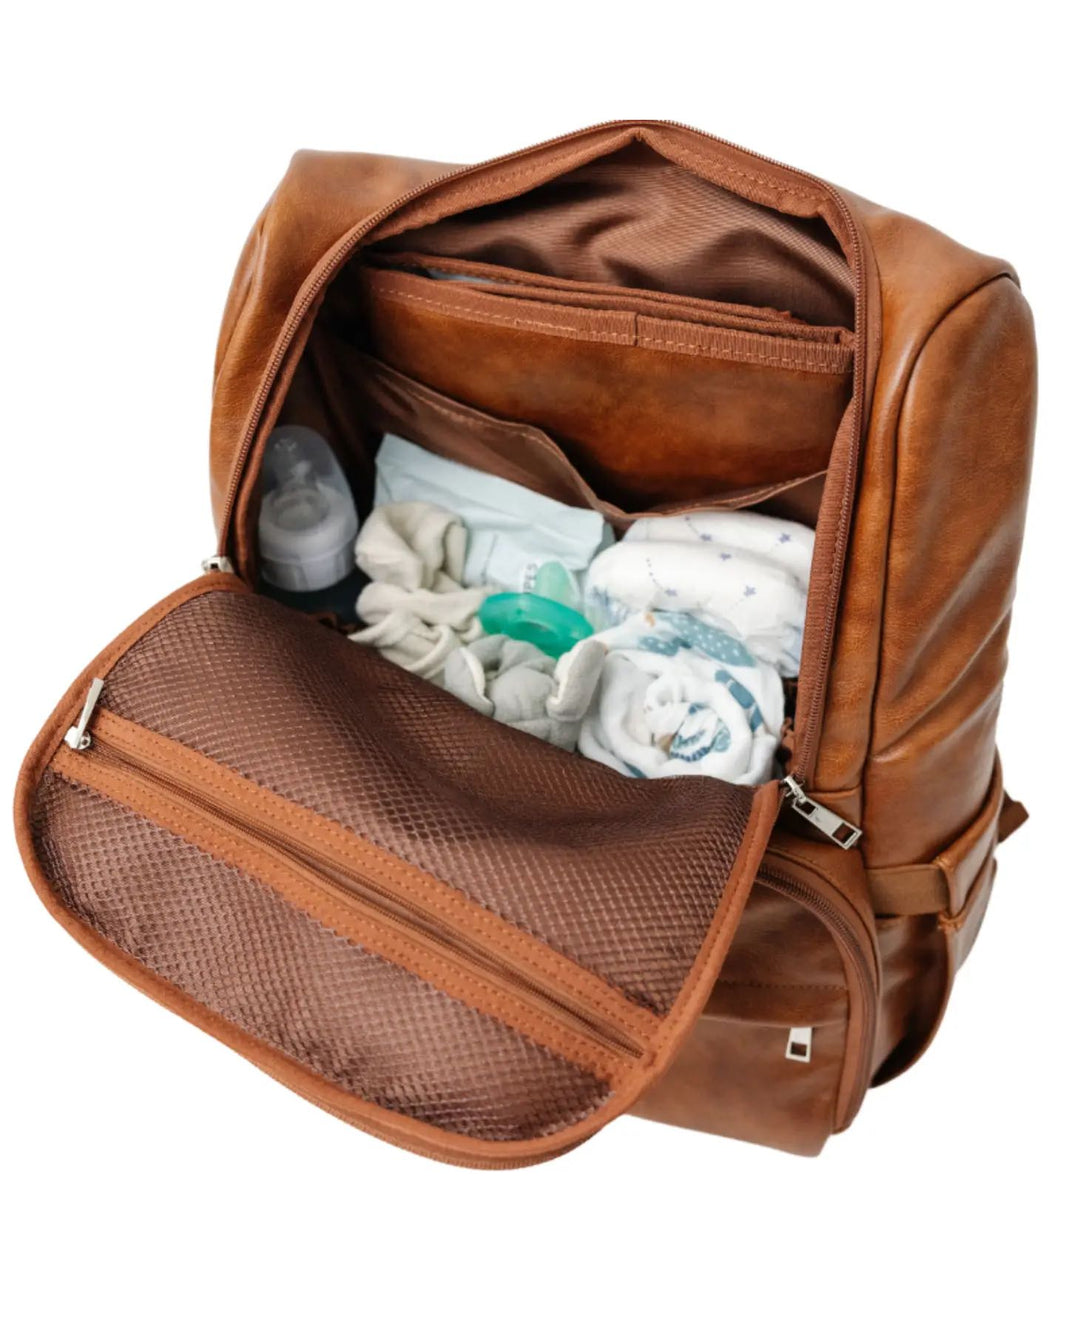 Main pocket of the Citi Collective Citi Navigator Diaper Bag | Saddle Brown opened with diapers, clothes and essentials